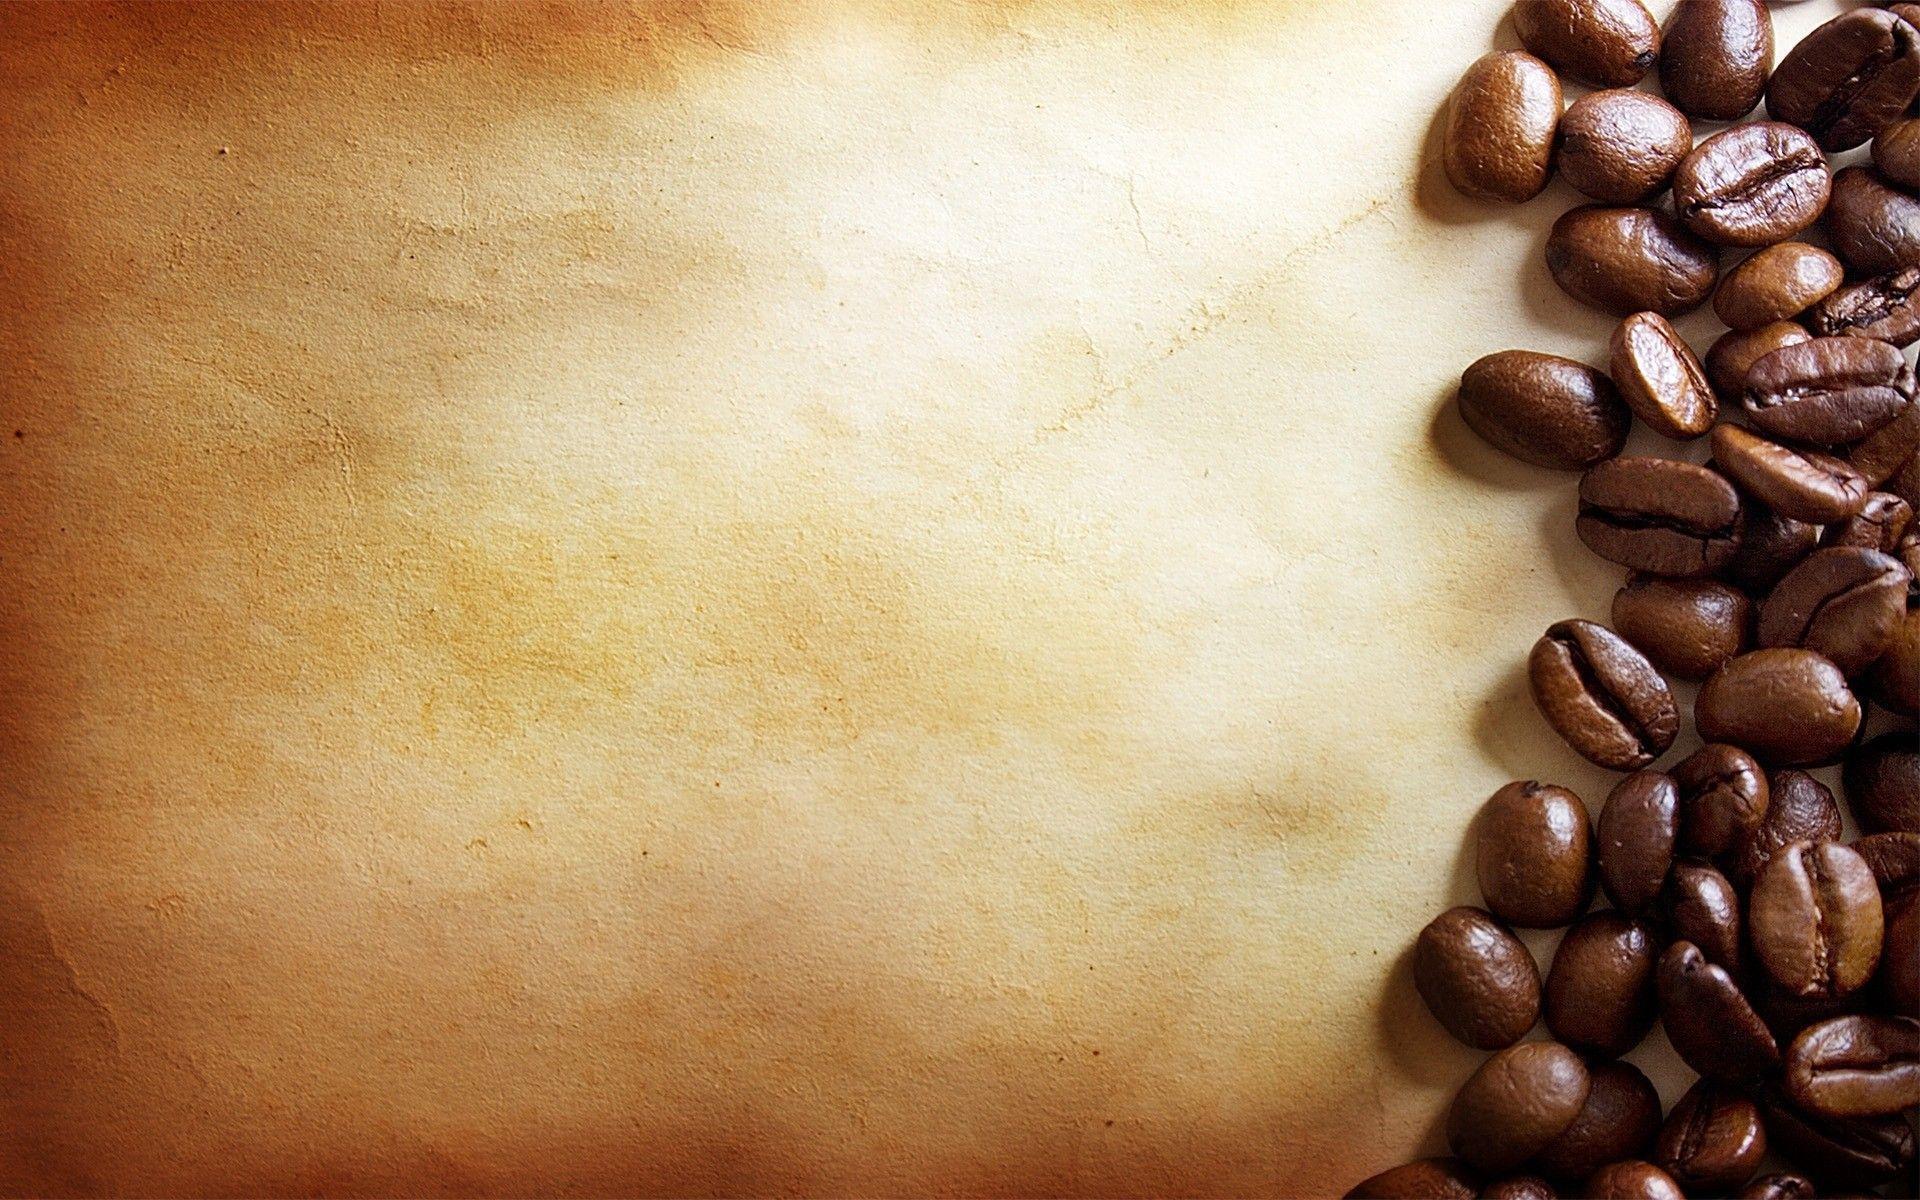 Coffee Beans Background Inspiration Ideas 15440 Decorating Ideas